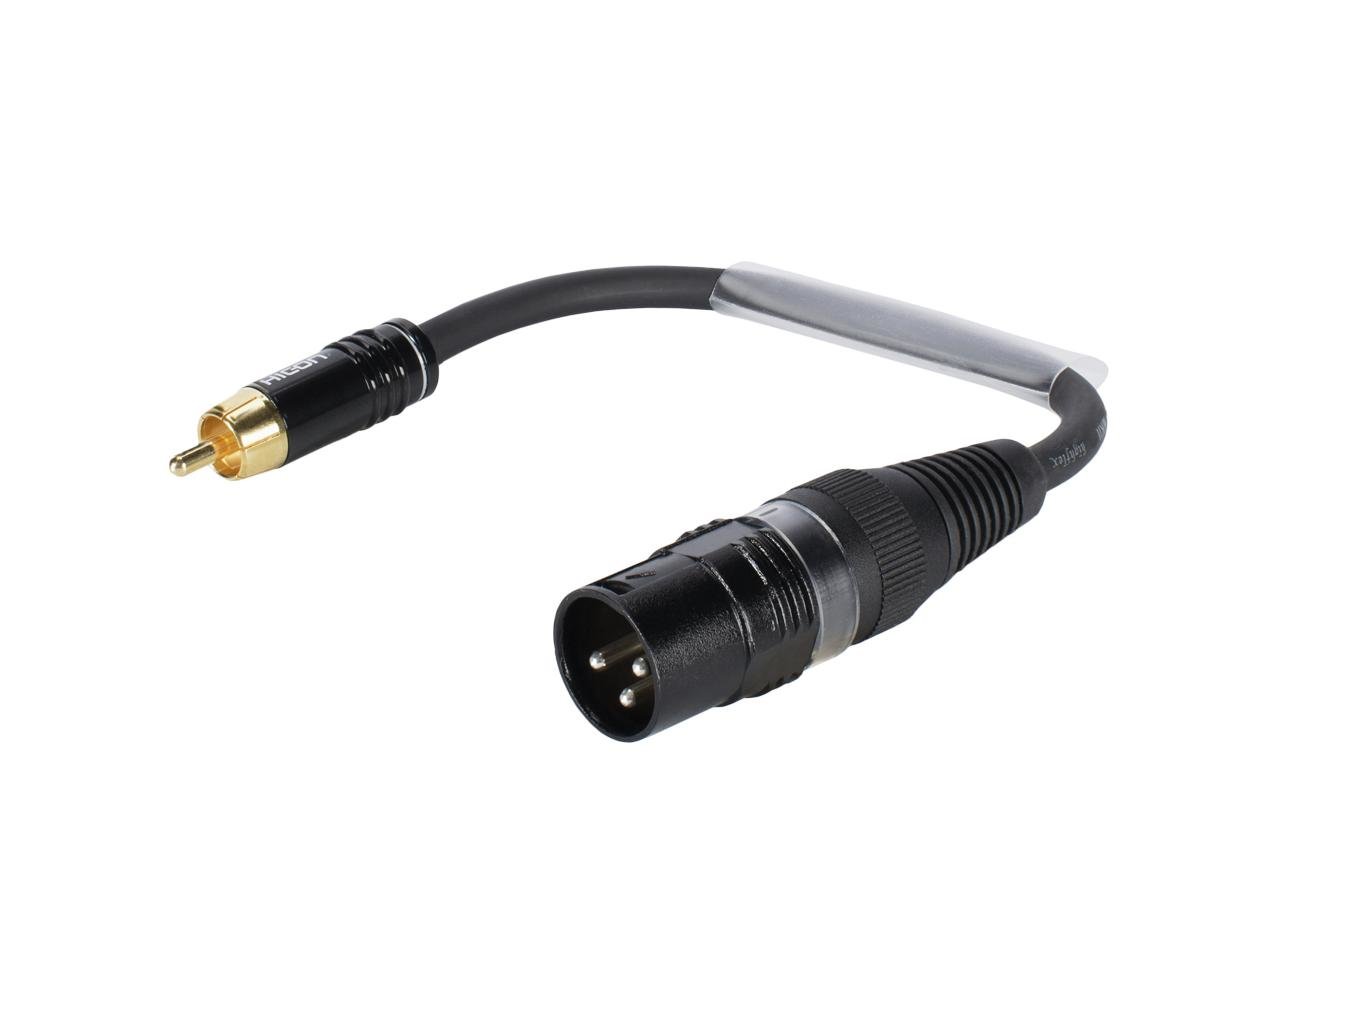 SOMMER CABLE Adaptercable XLR(M)/RCA(M) 0.15m bk